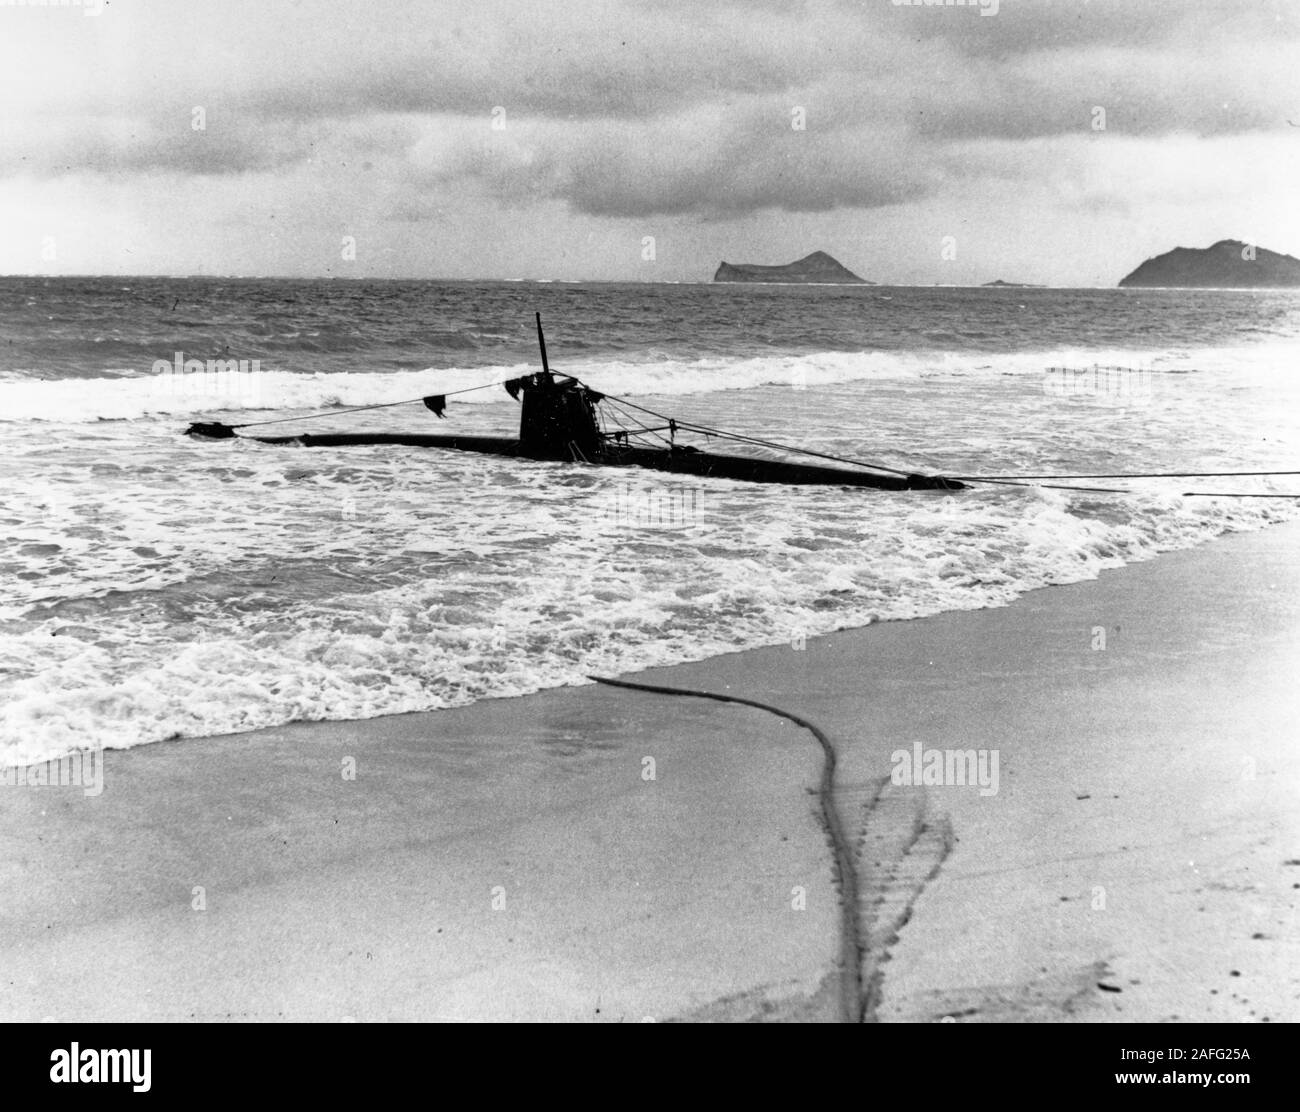 (Japanese Type A midget submarine) Beached on Oahu, after it went aground following attempts to enter Pearl Harbor during the 7 December 1941 Japanese attack. The photograph was taken on or shortly after 8 December 1941. Stock Photo